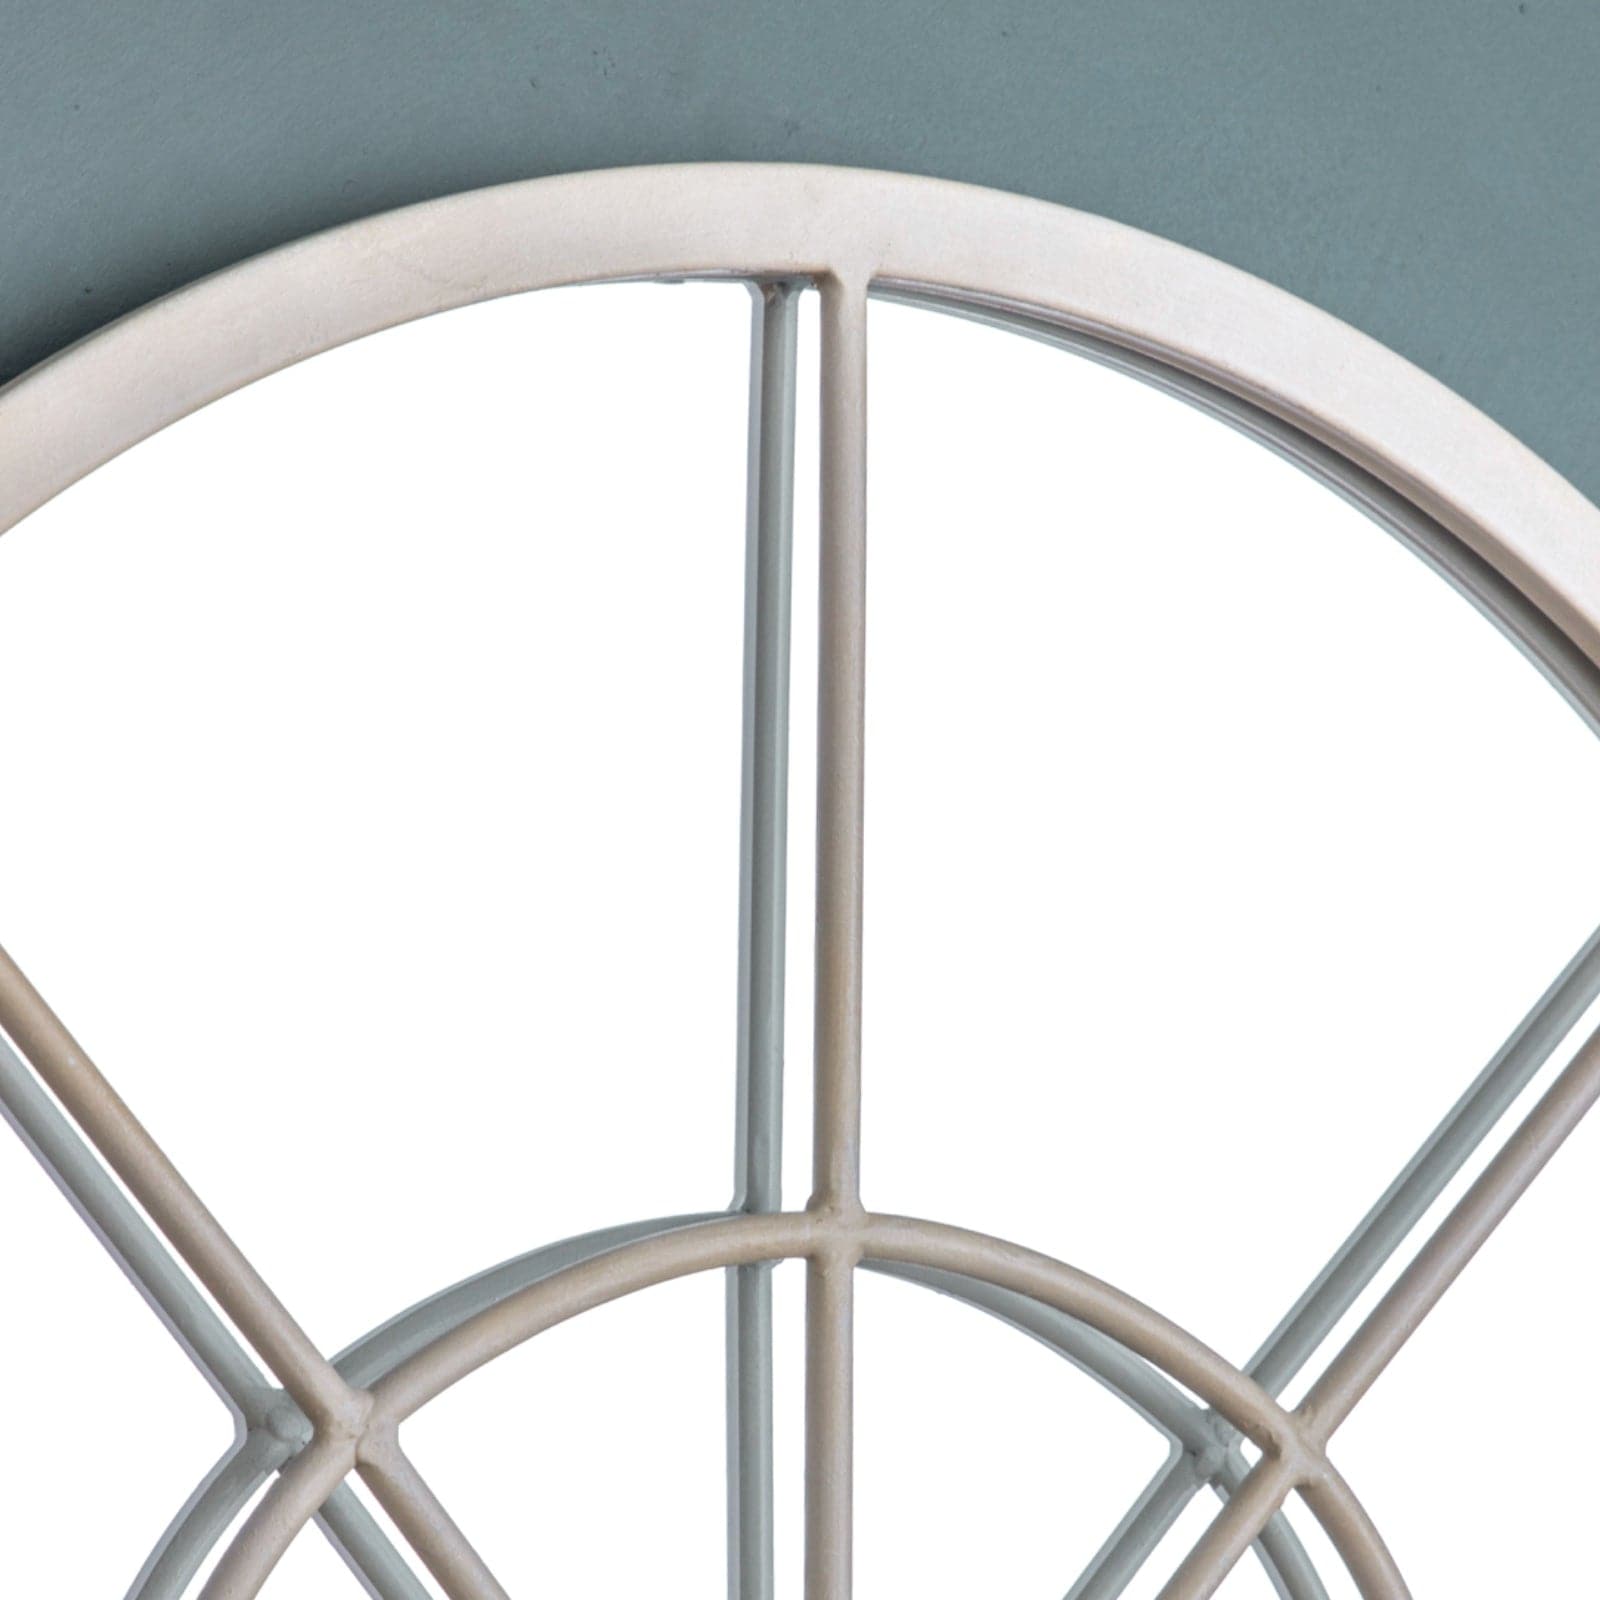 Distressed Cream Arched Top Window Mirror - The Farthing